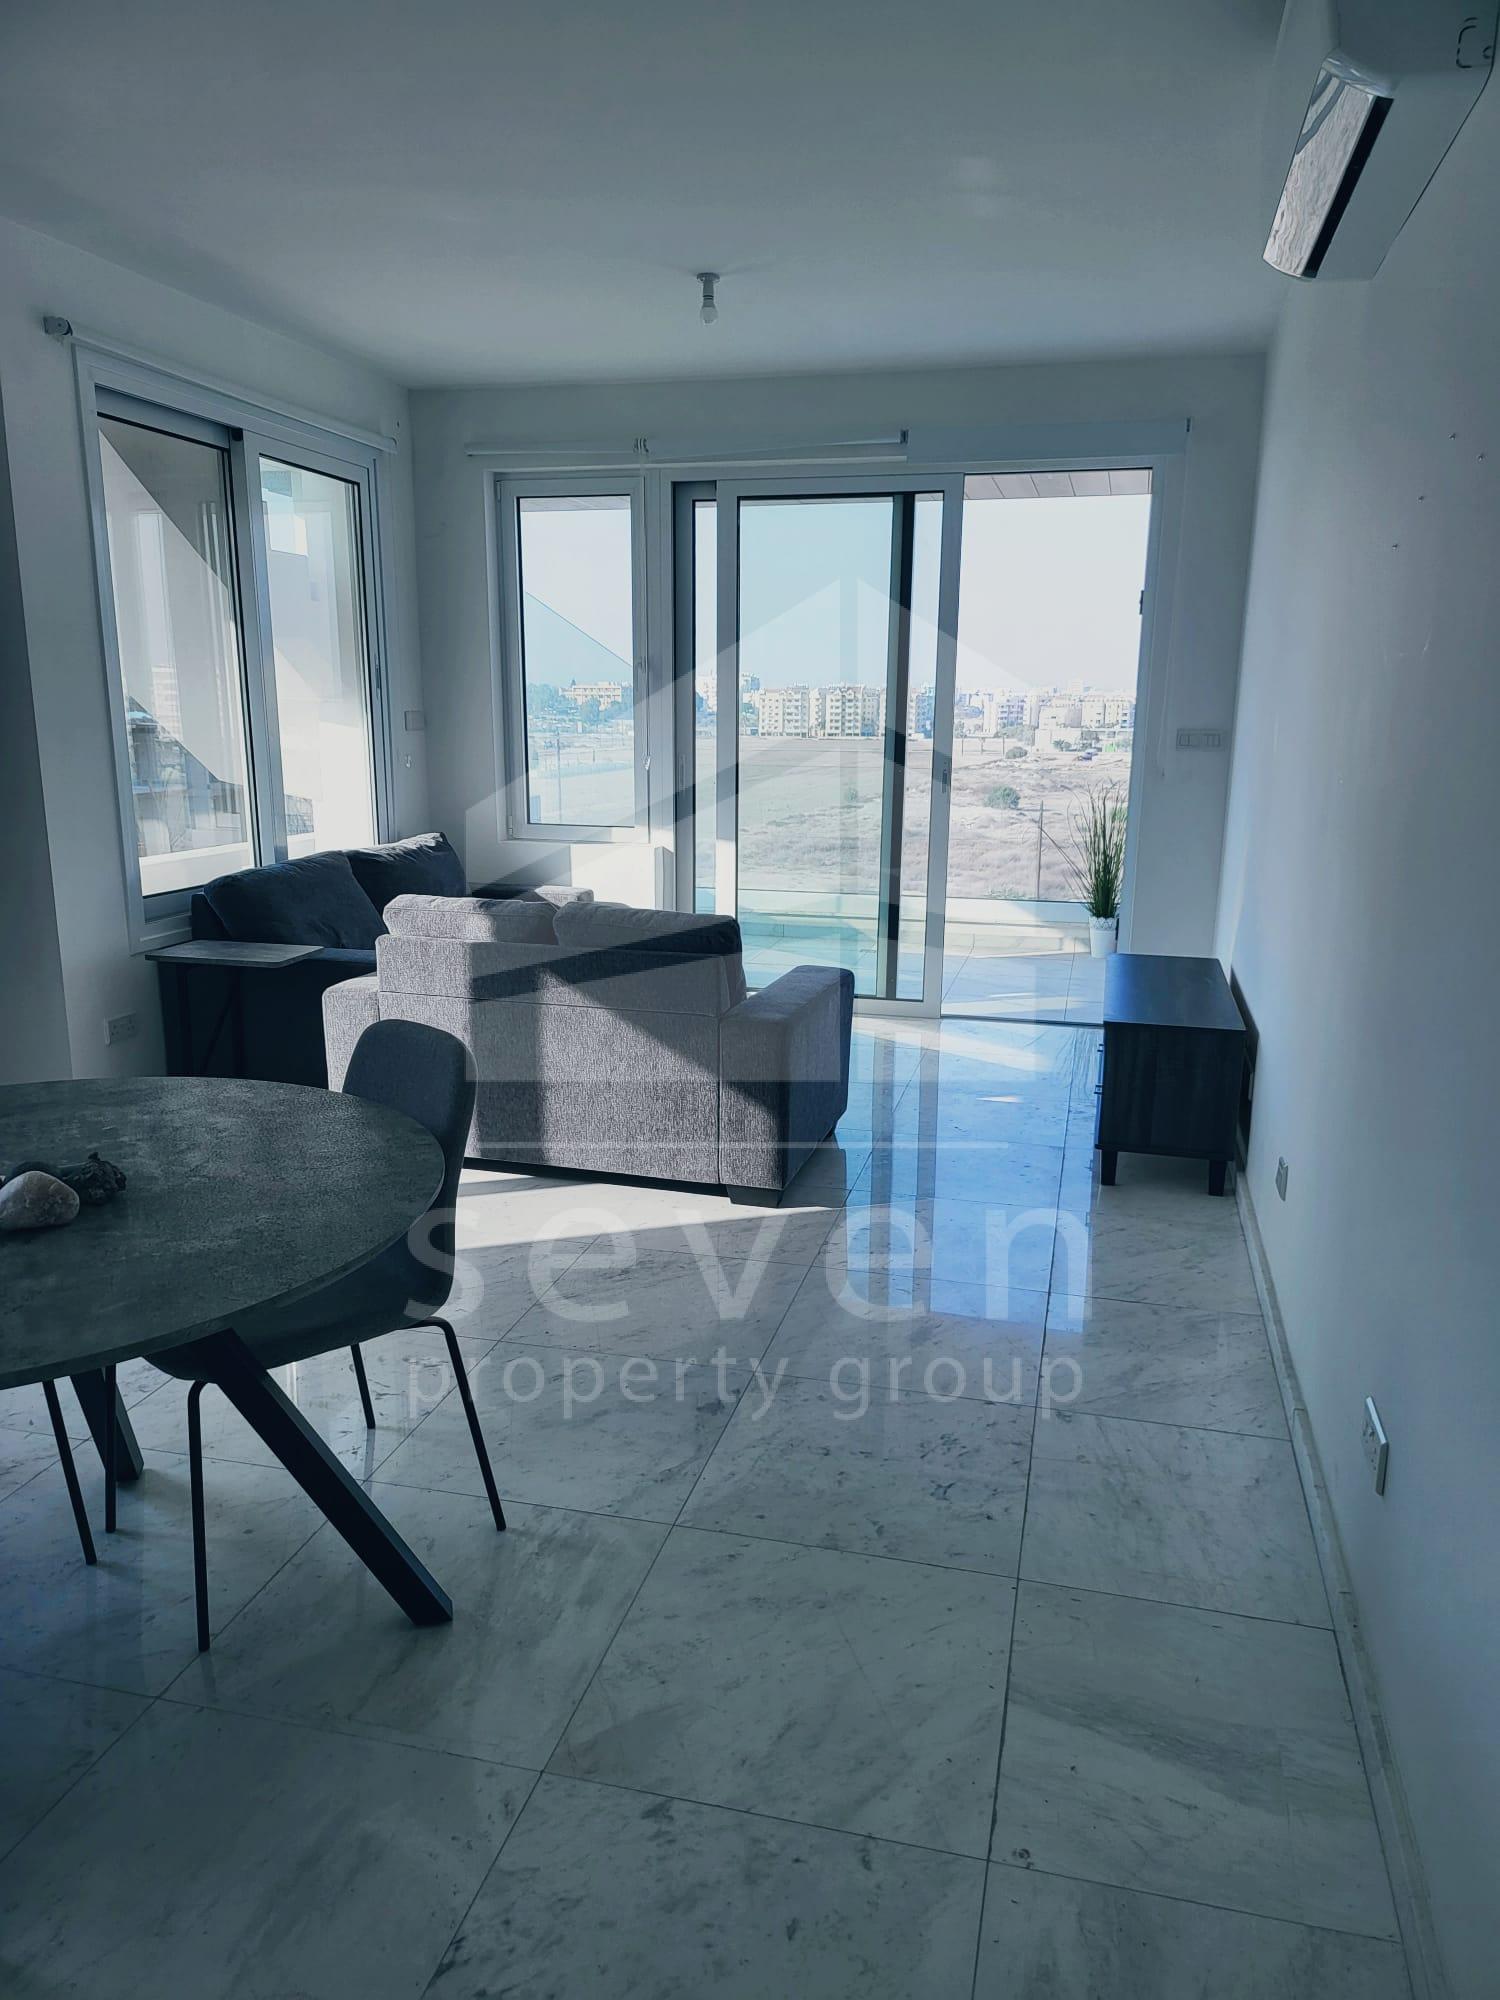 TWO BEDROOM PENTHOUSE FOR RENT IN MAKENZY